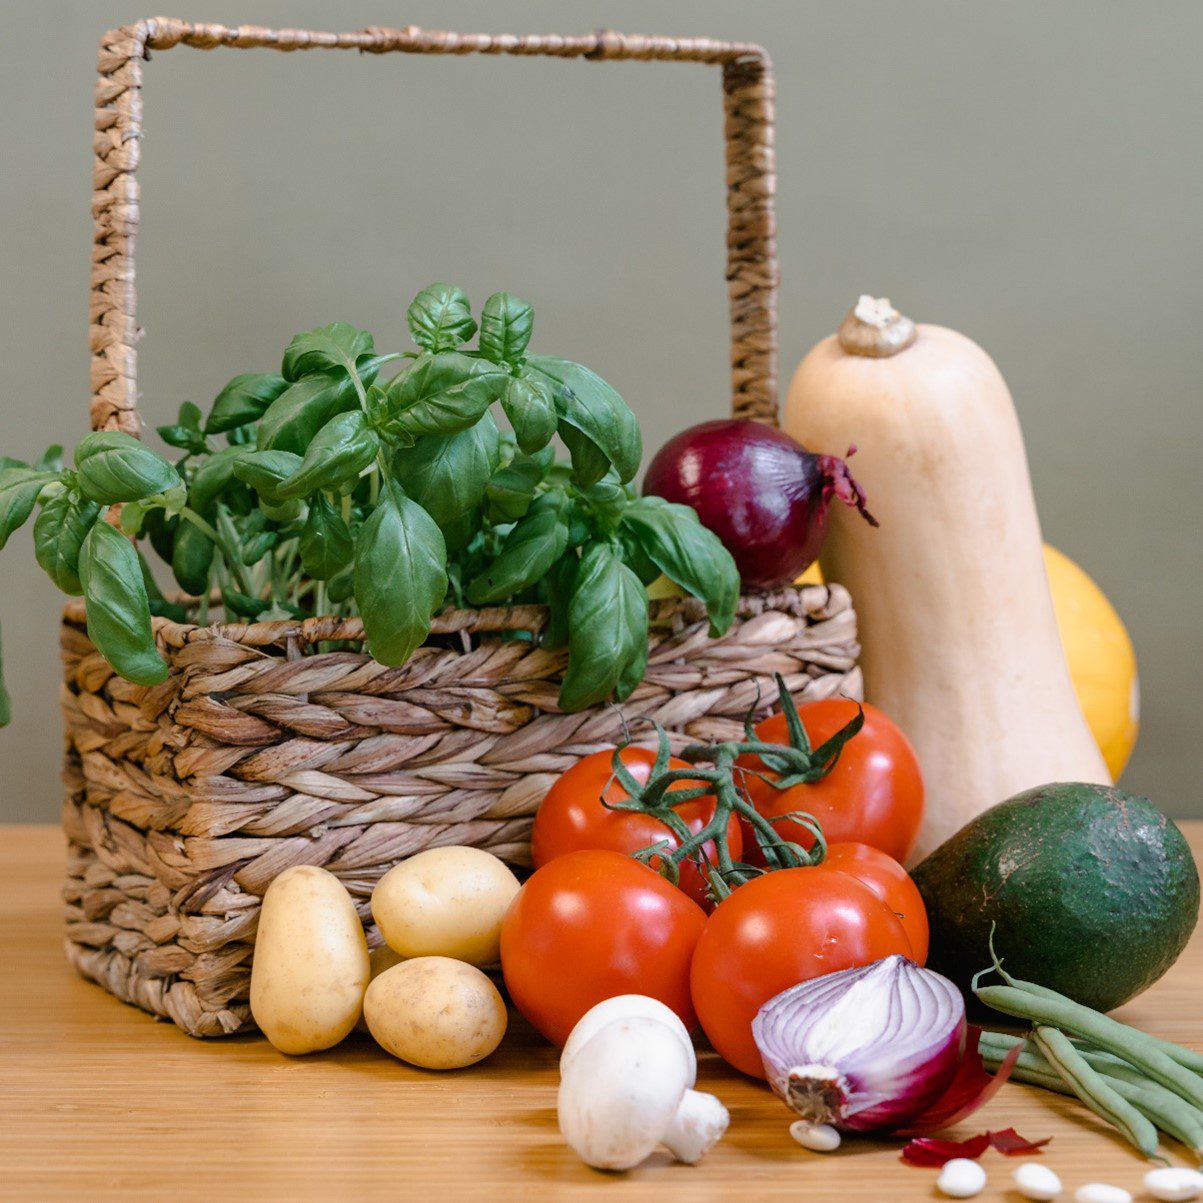 Basket of herbs and local vegetable surrounding the basket